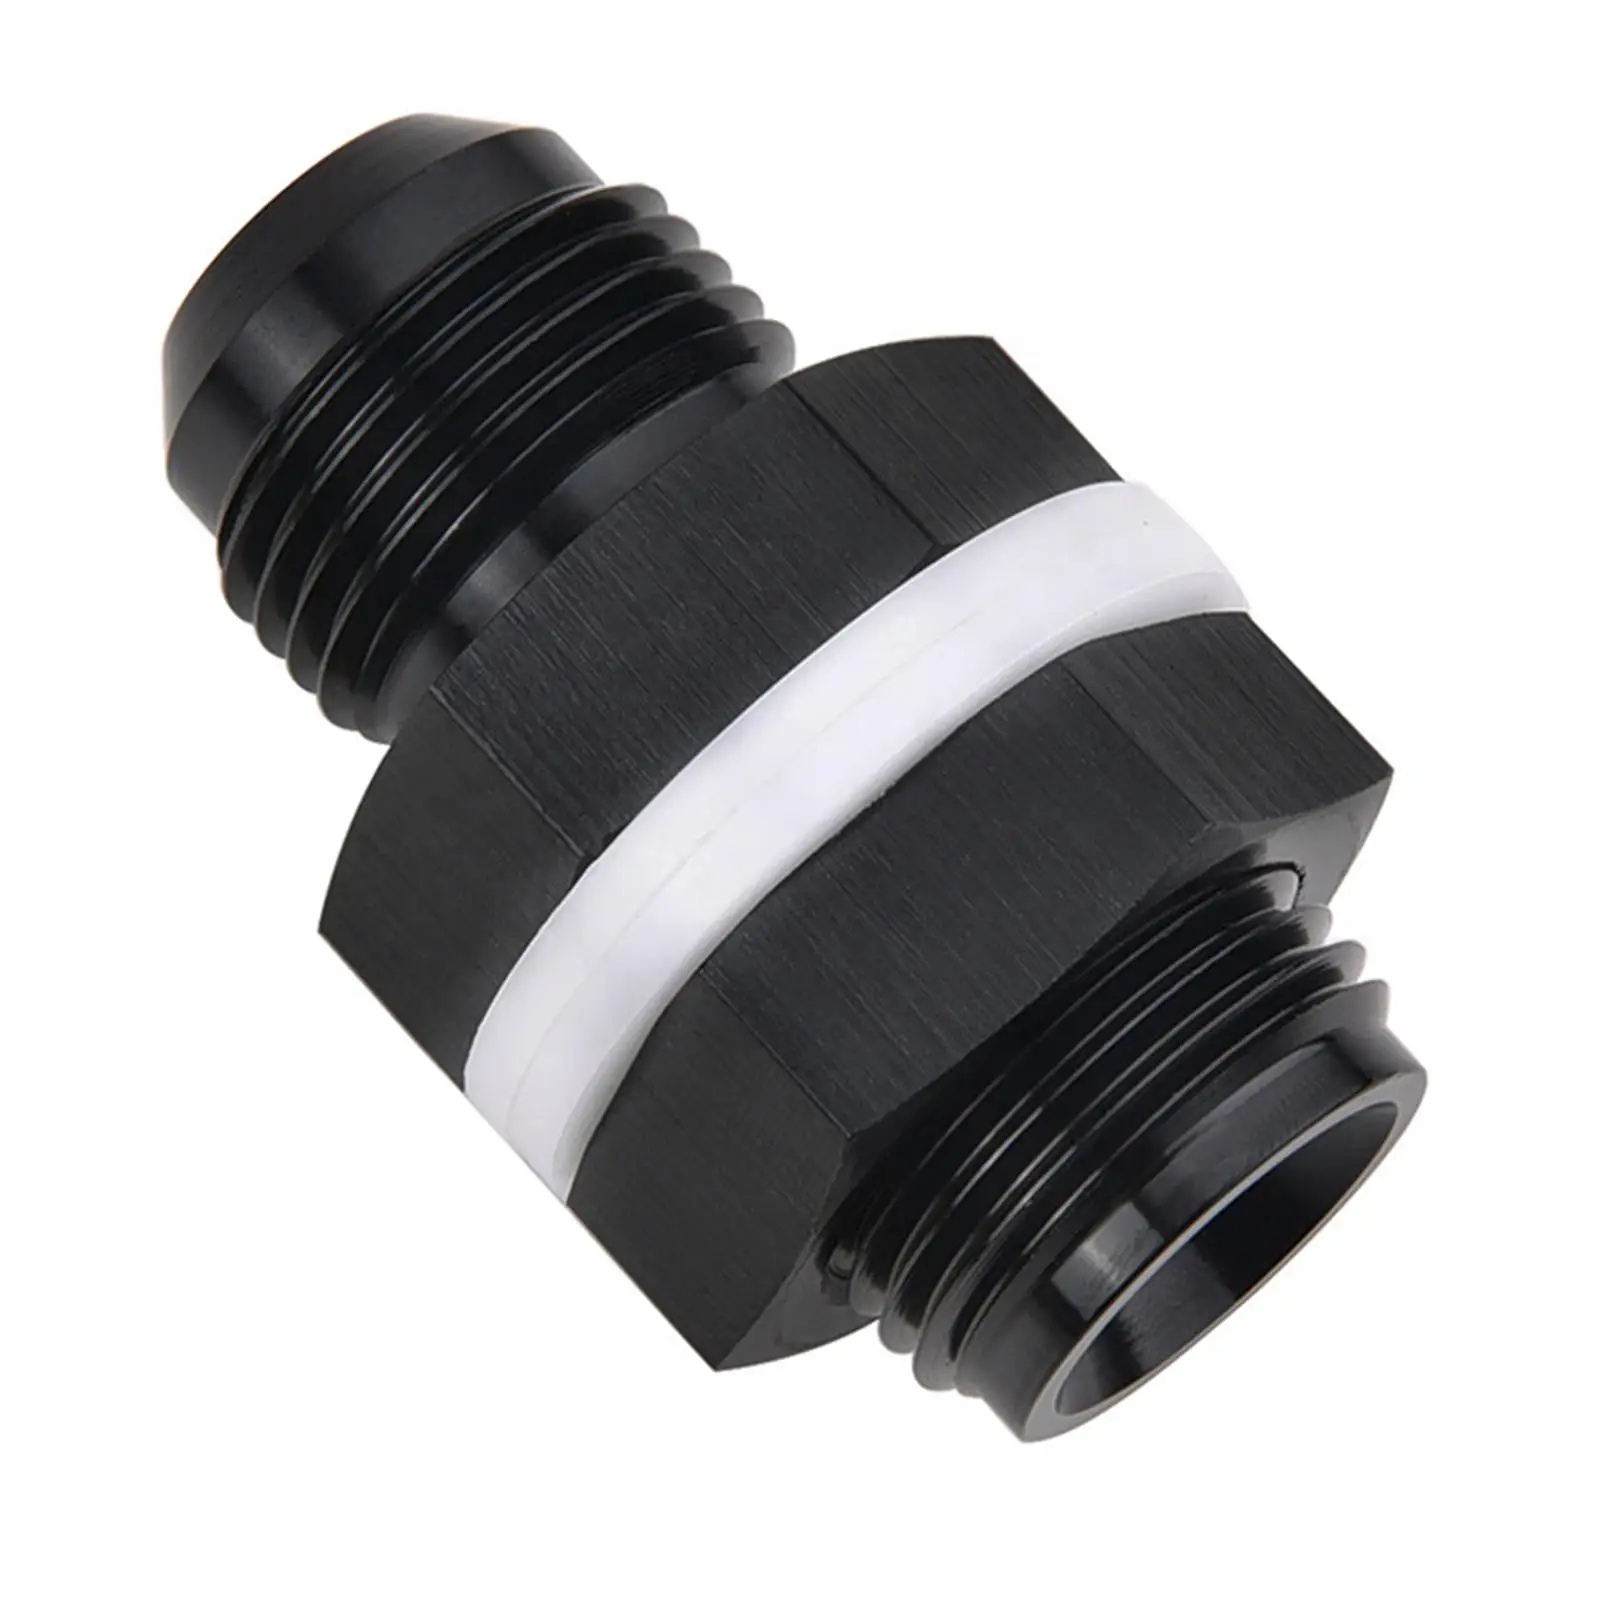 Aluminum Fuel Cell Bulkhead Fitting Adapter Black Replacement Auto Parts